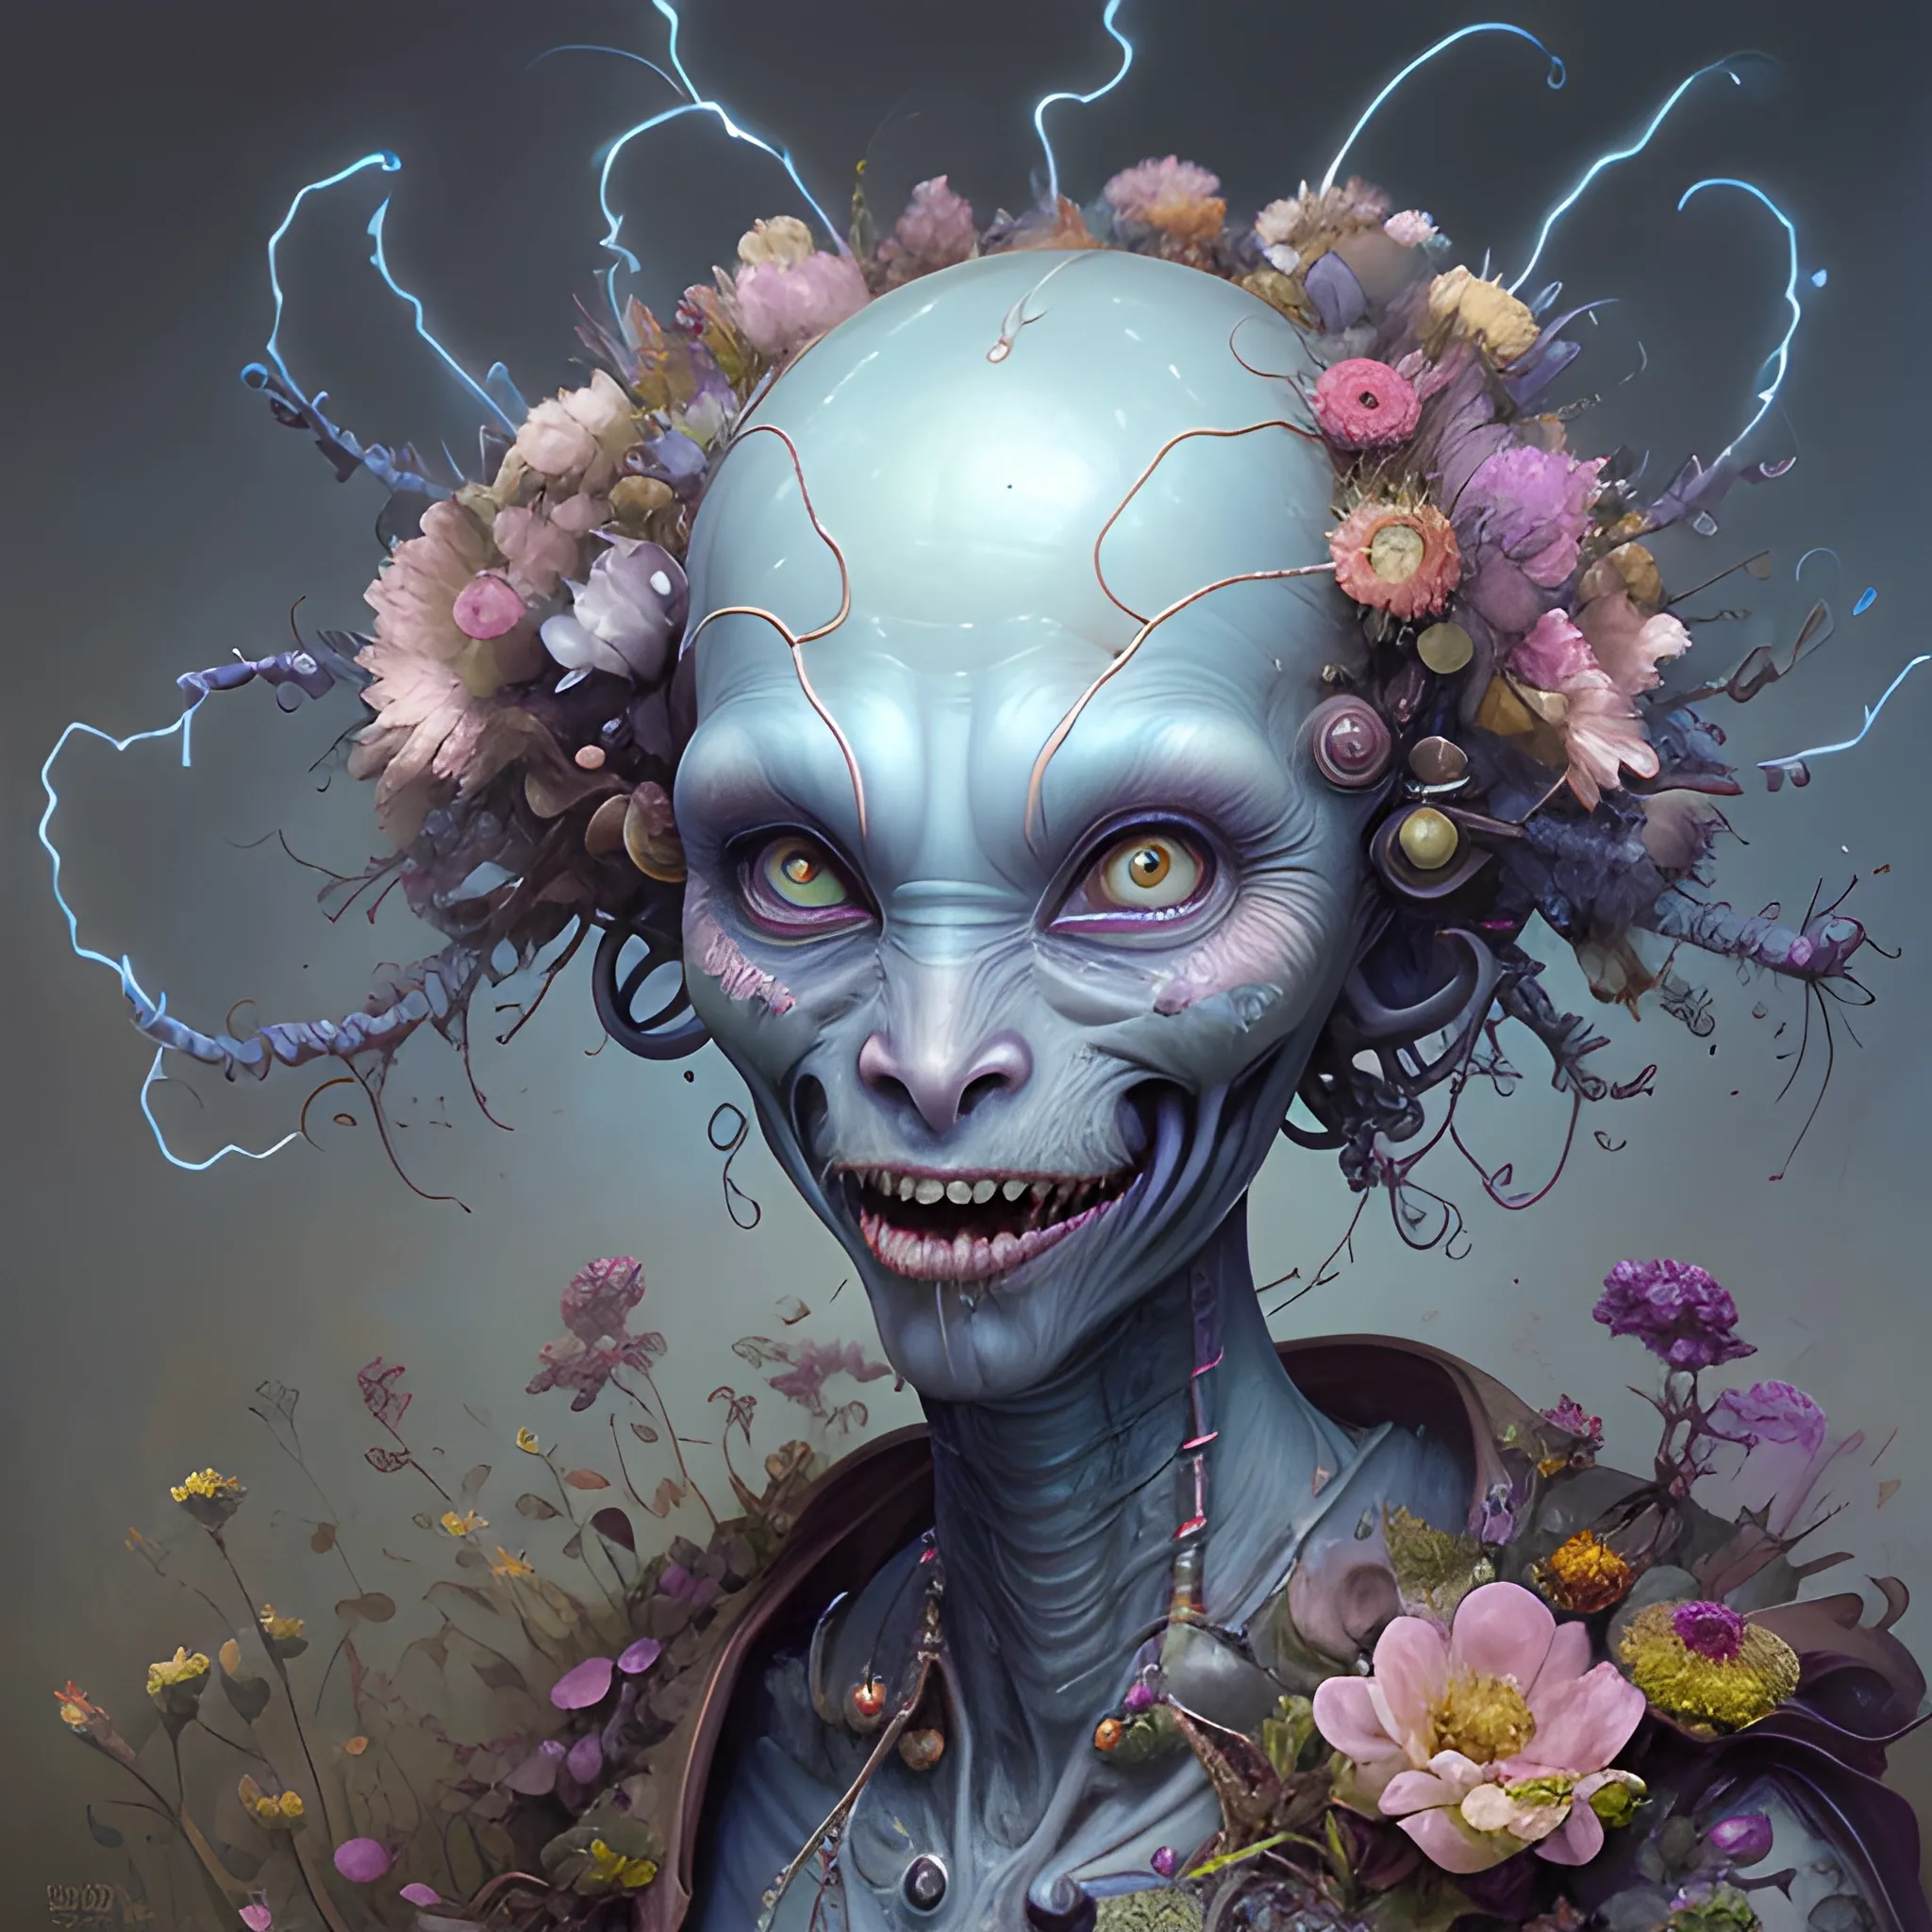 Weird alien with blue lightning and candy, mouth open, strange garden, flower heaven, fabulous characters with character by Jean-Baptiste Monge, Ralph Horsley character portrait, cgsociety, fantastic art, formal art, contest winner, concept art demarchelier, pastel colors, desaturated composition, digital painting - n 5, details and vivid colors, painting style, soft red tones, realistic, intangible quality, 12k resolution, complex details, perfect sharpness